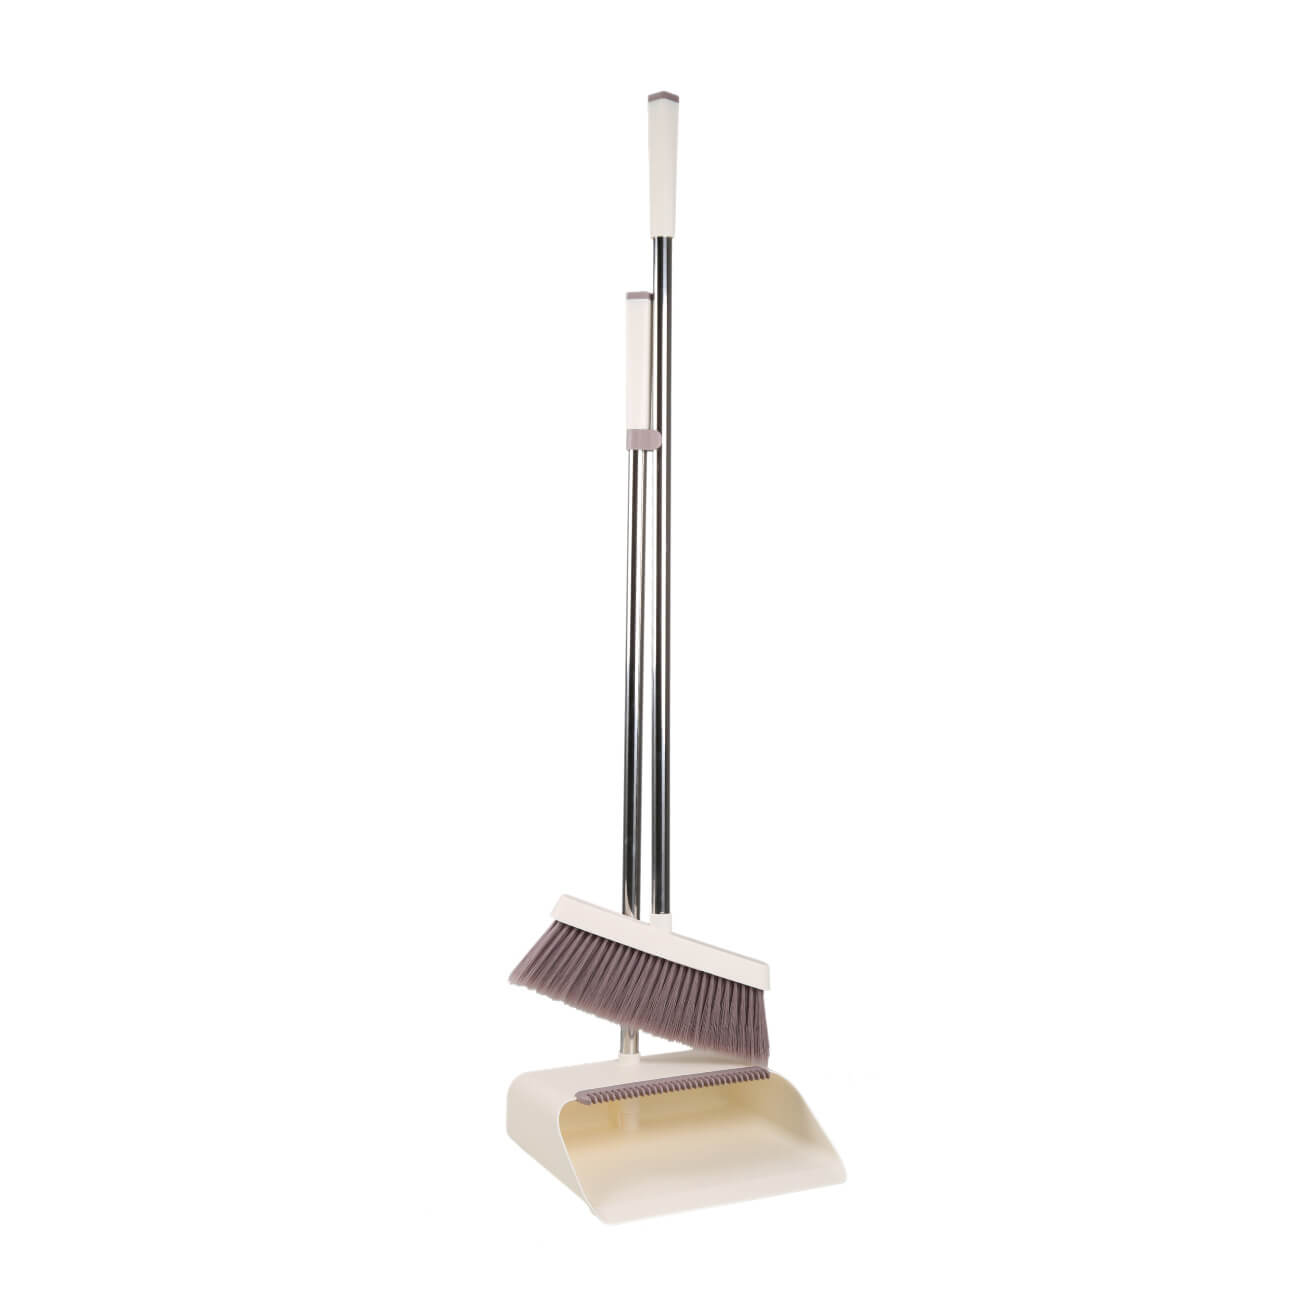 Garbage brush, with dustpan, 92 cm, plastic / steel, white and purple, Sweep изображение № 1